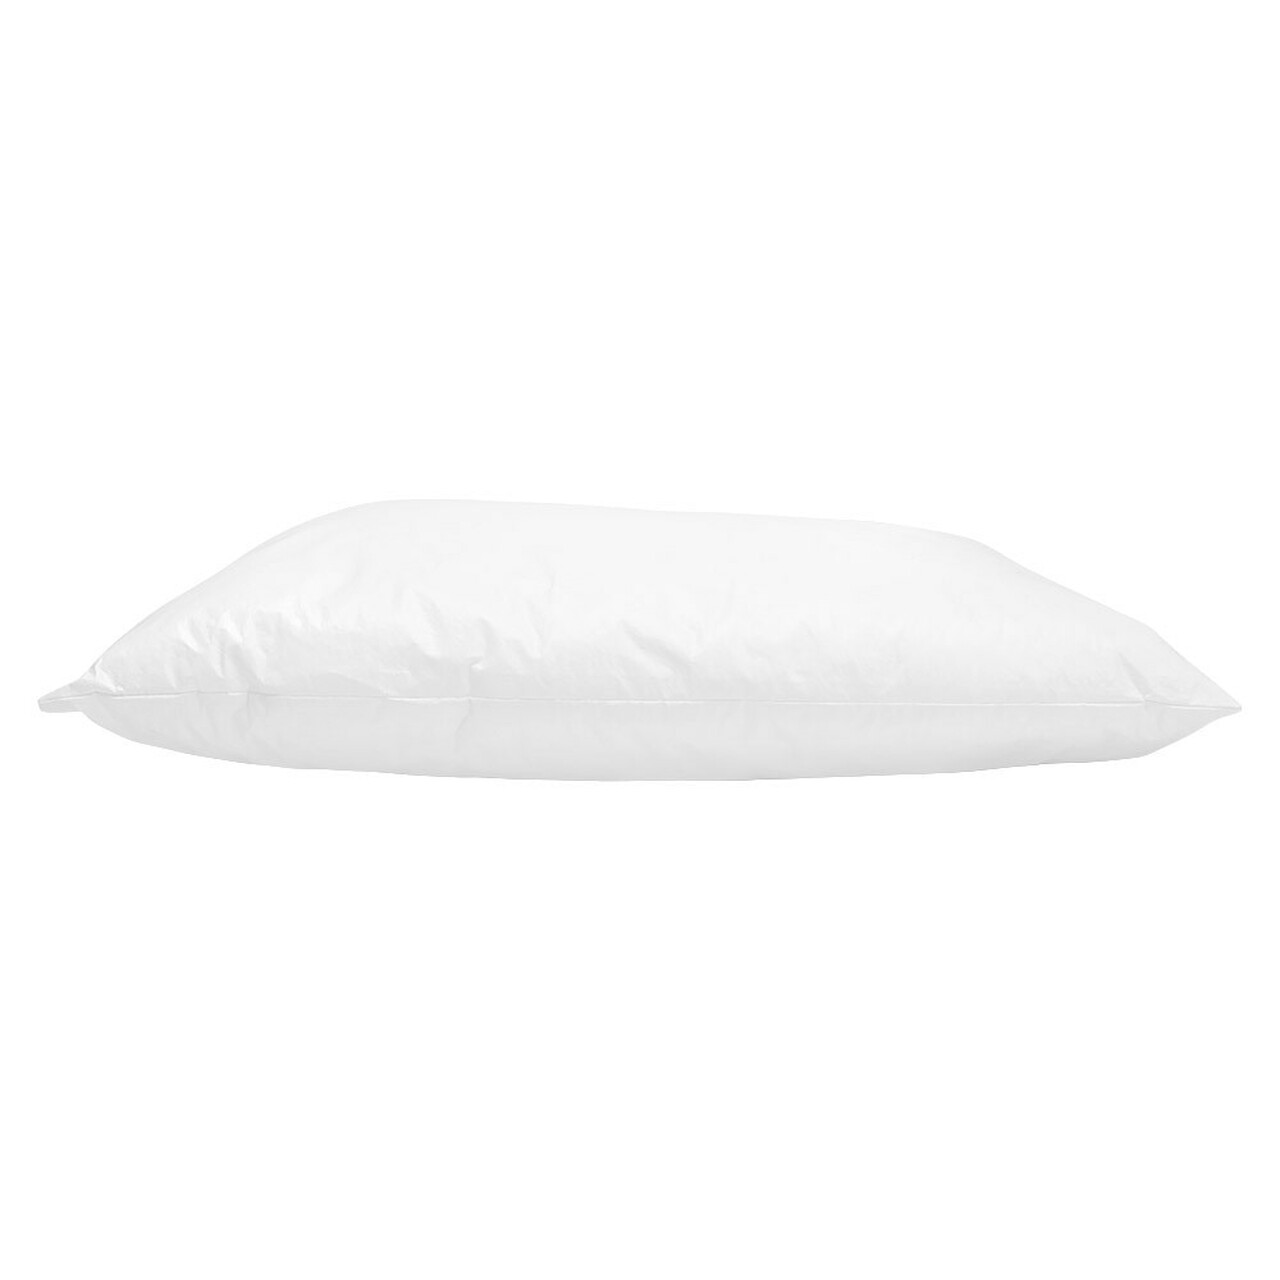 DryLife Pillow PVC Waterproof Outer White 44x67cm image 1